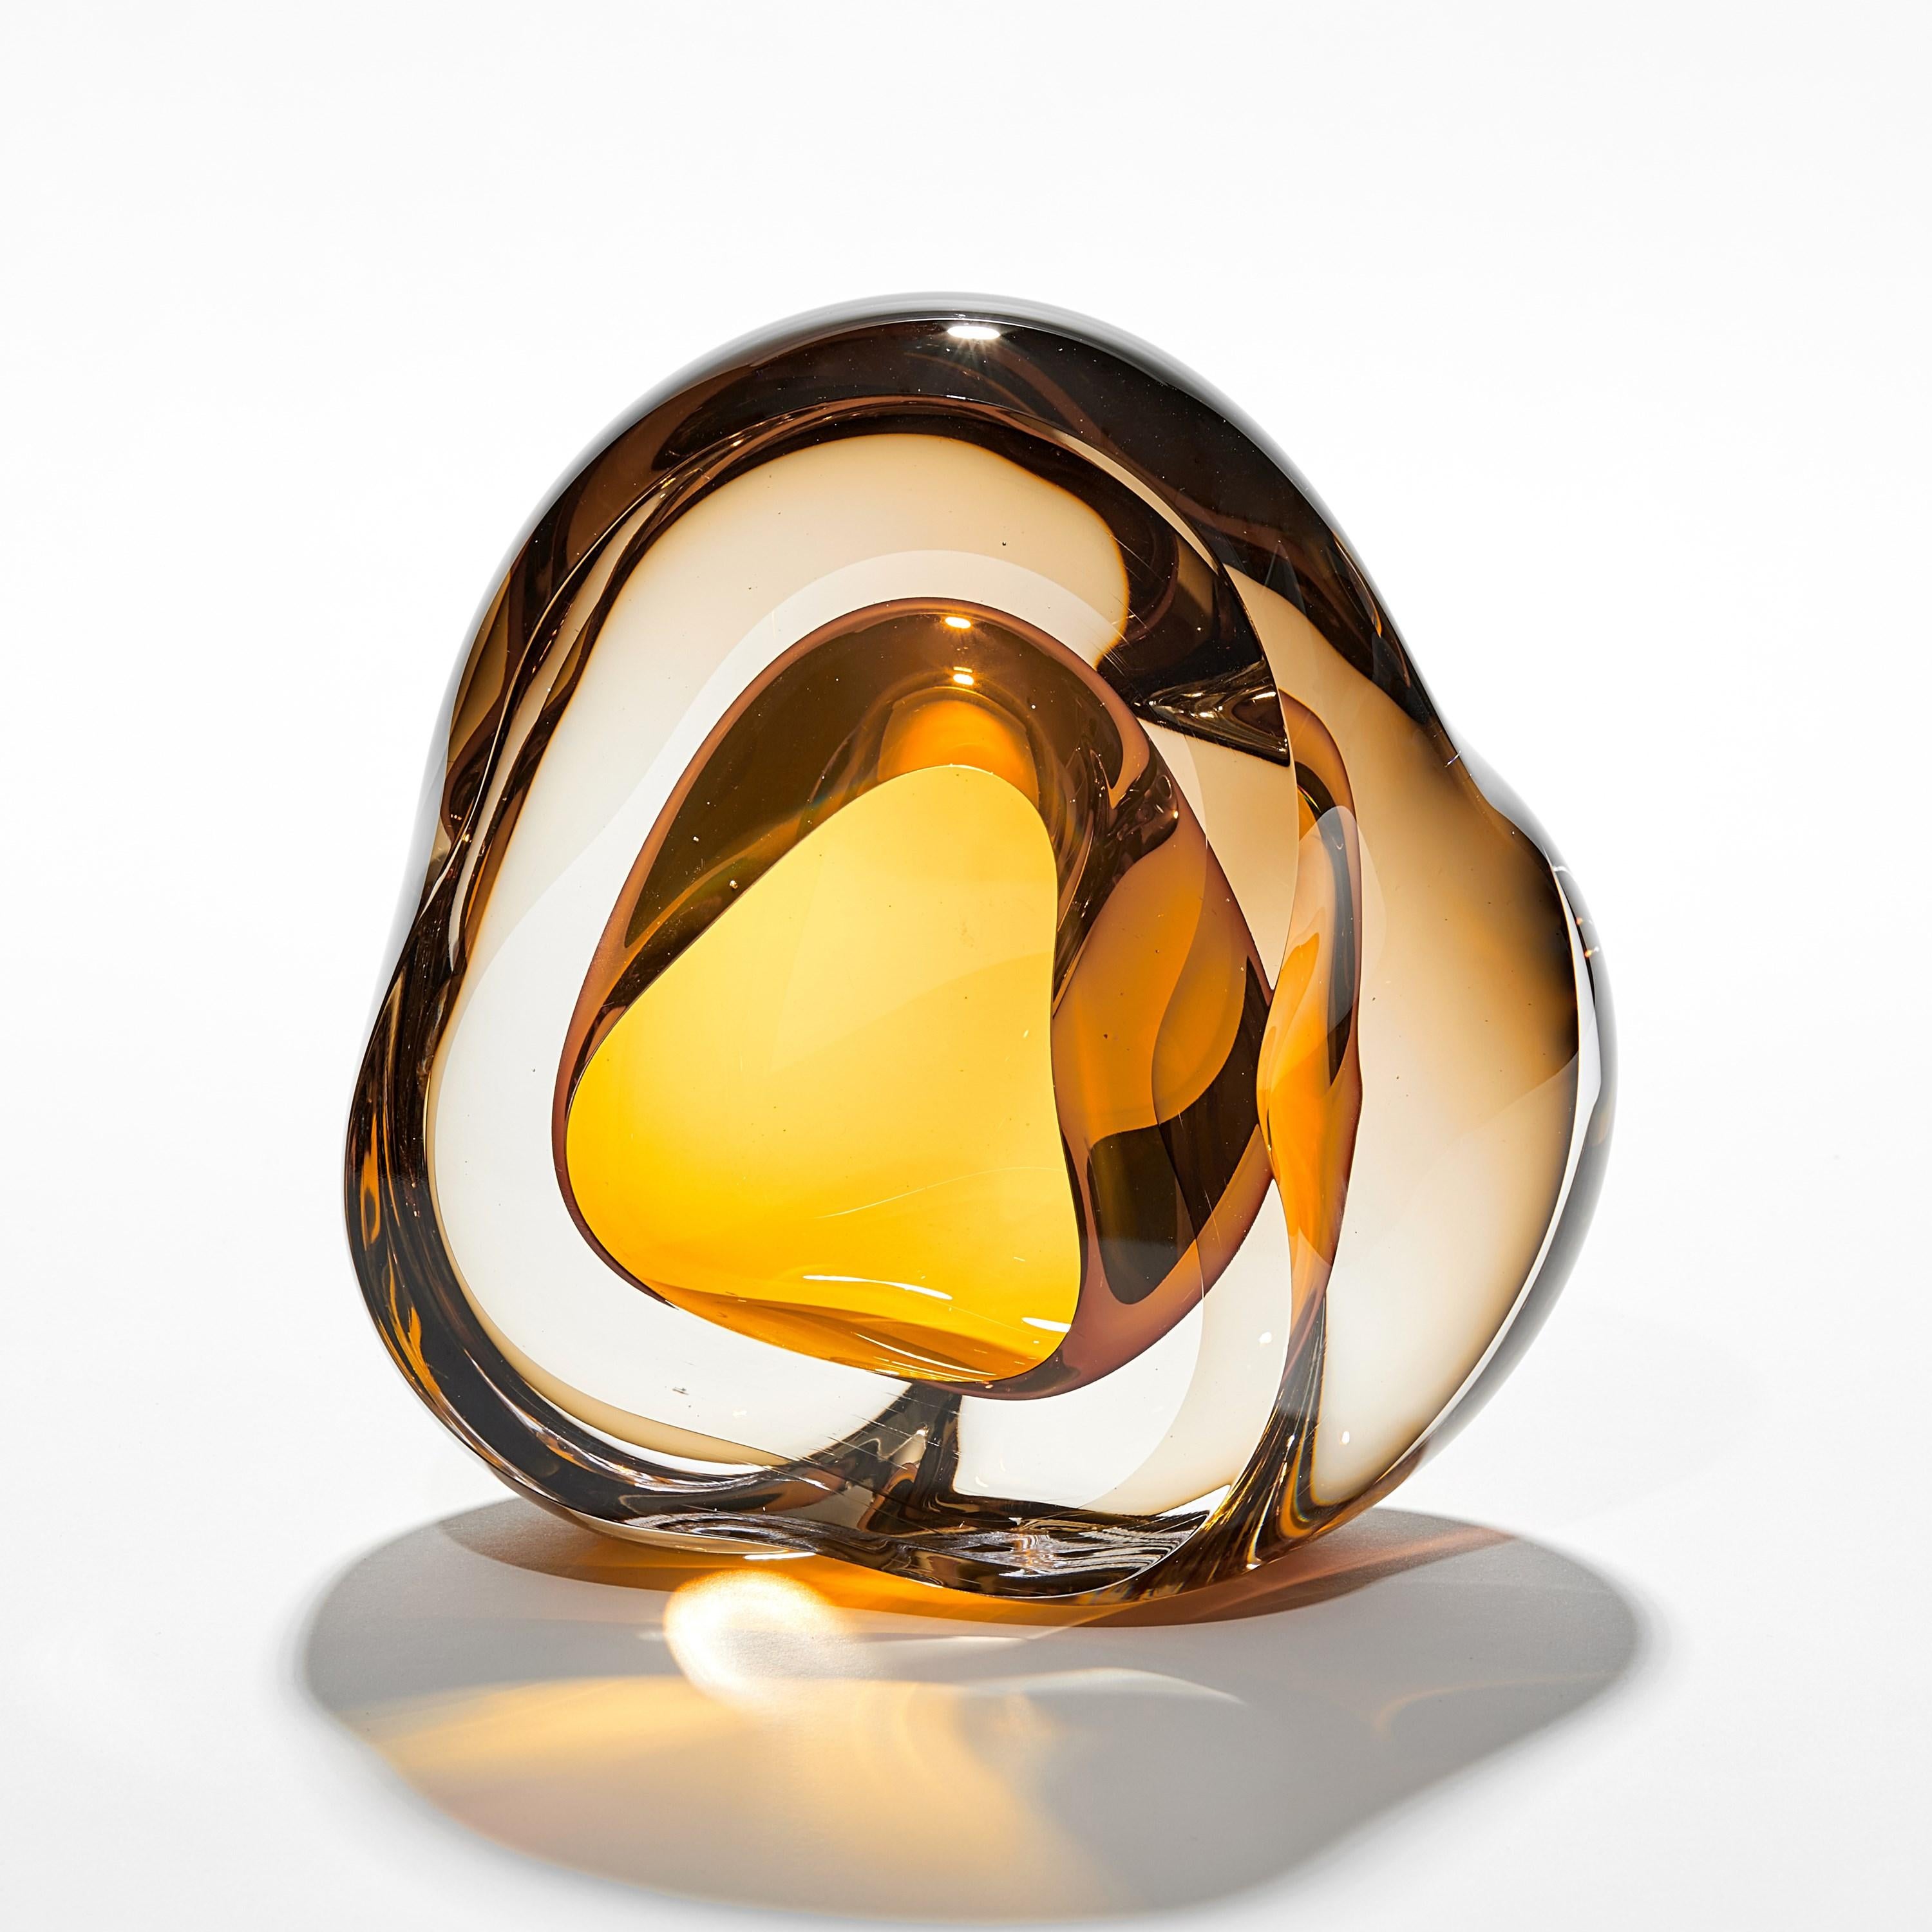 'Vug in Olivin & Gold Topas' is a unique hand blown sculpture by the British artist, Samantha Donaldson.

Created by layers of coloured glass, the transparent colours merge and create further hues throughout the piece. An additional optical